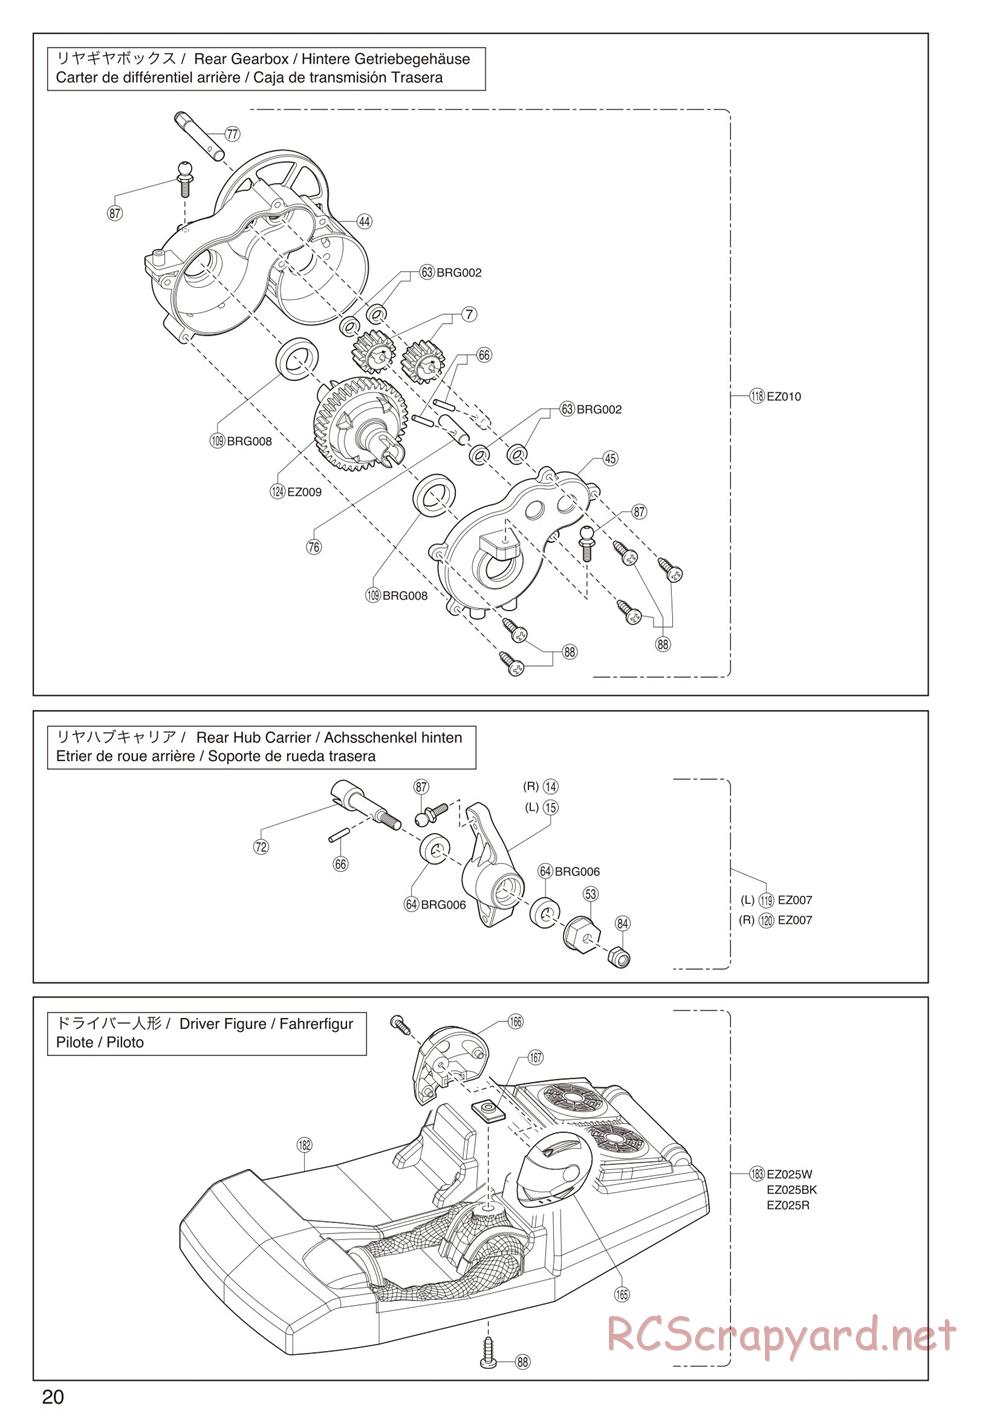 Kyosho - Axxe 2WD Desert Buggy - Exploded Views - Page 4